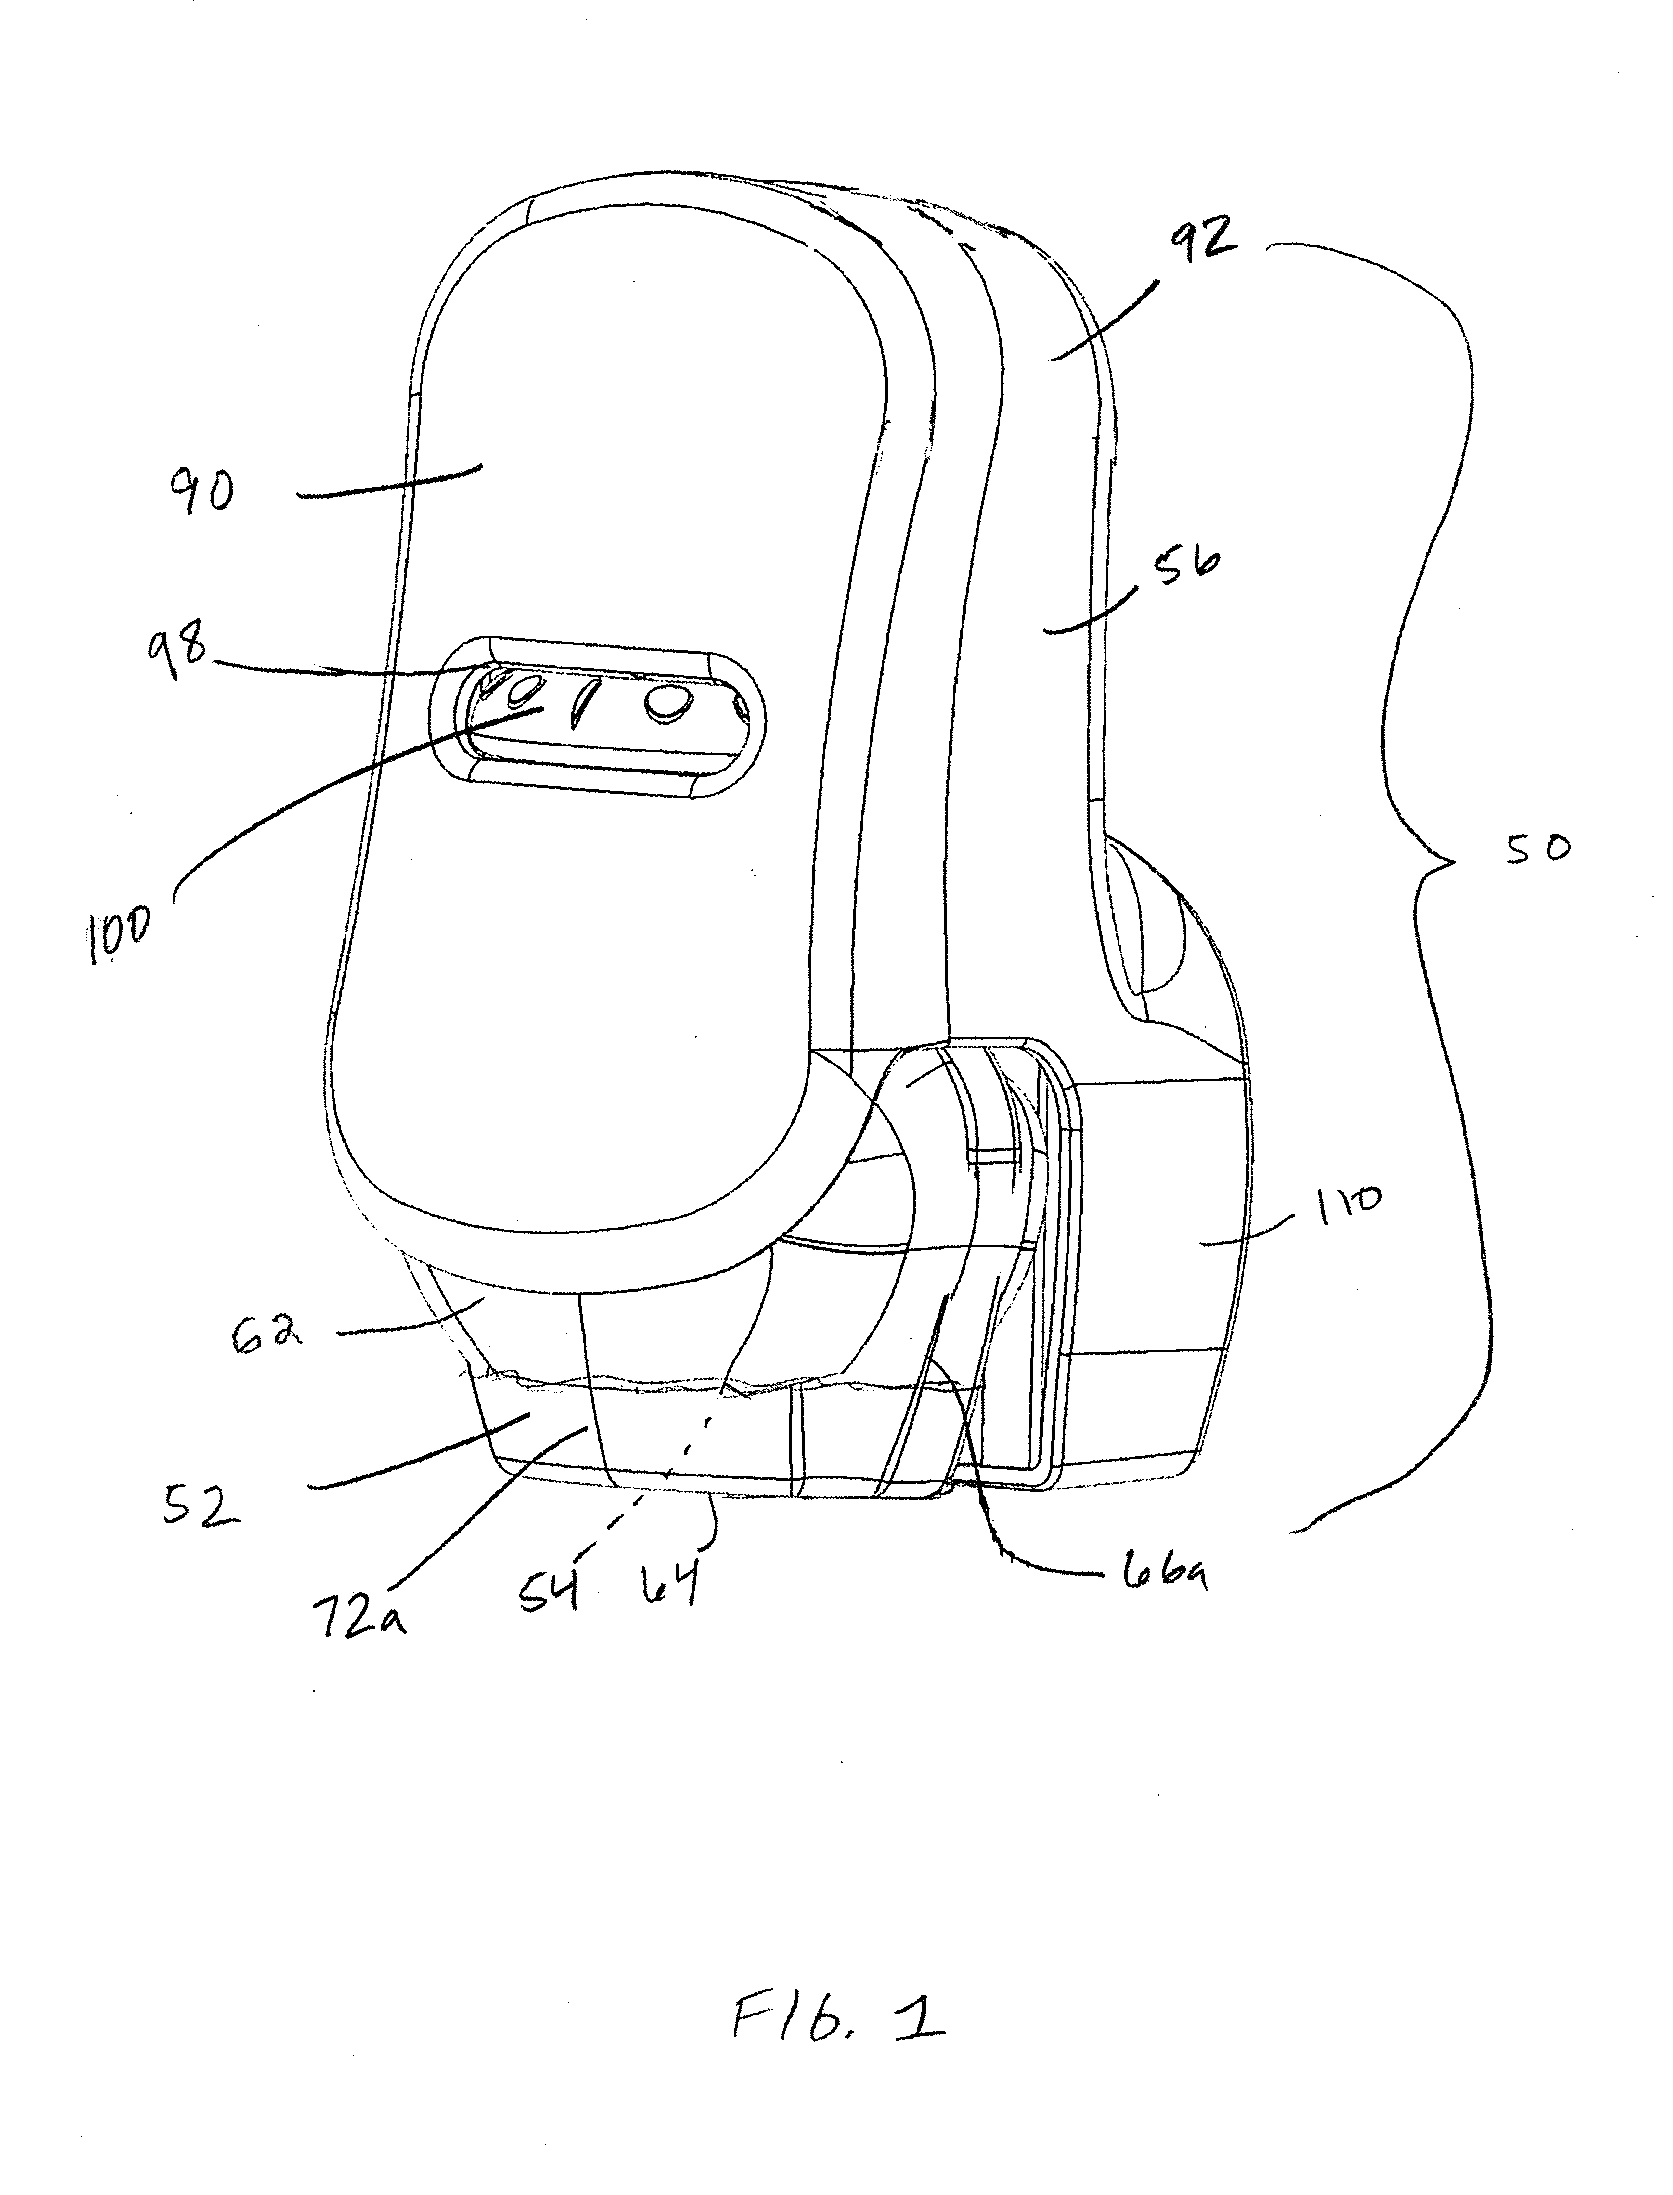 Rotating Electrical Plug Assembly for Volatile Material Dispenser